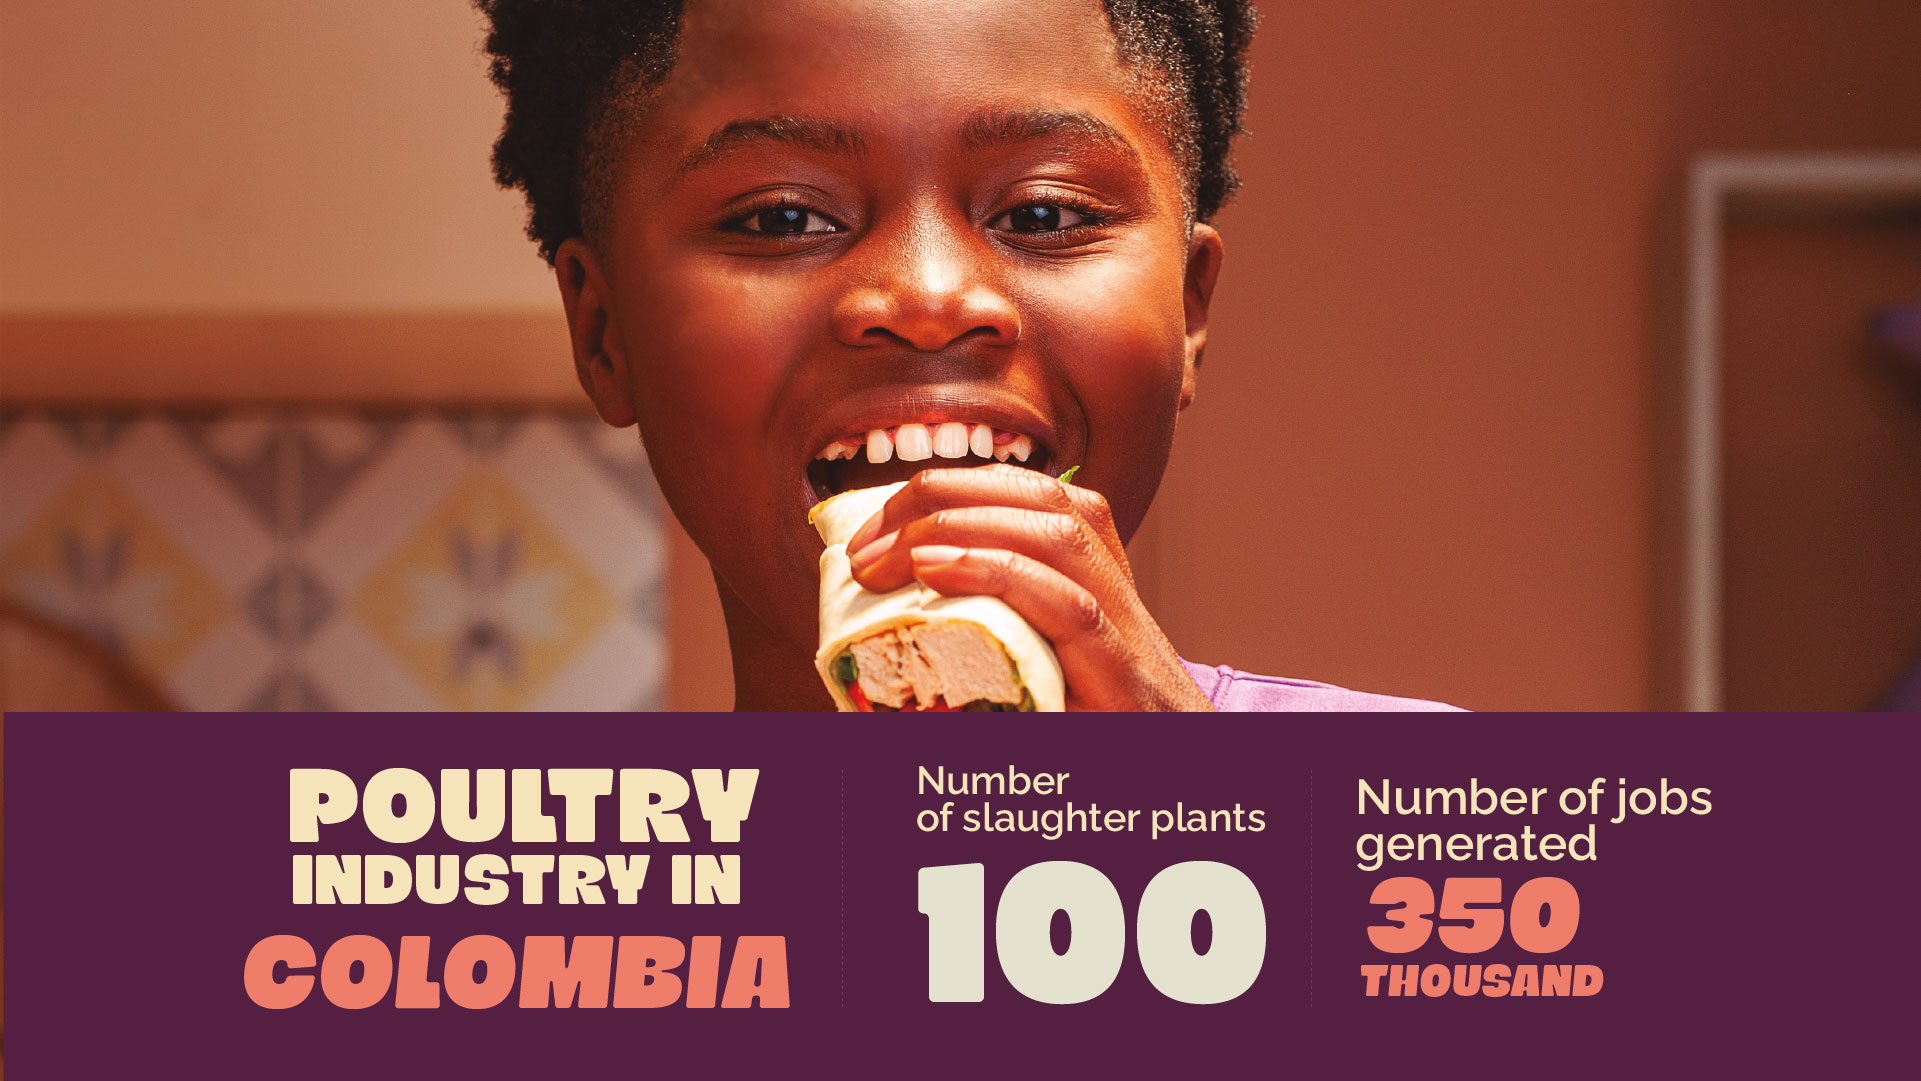 Poultry industry in Colombia. Numbre of slaughter plans 100. Number of jobs generated 350 thousand